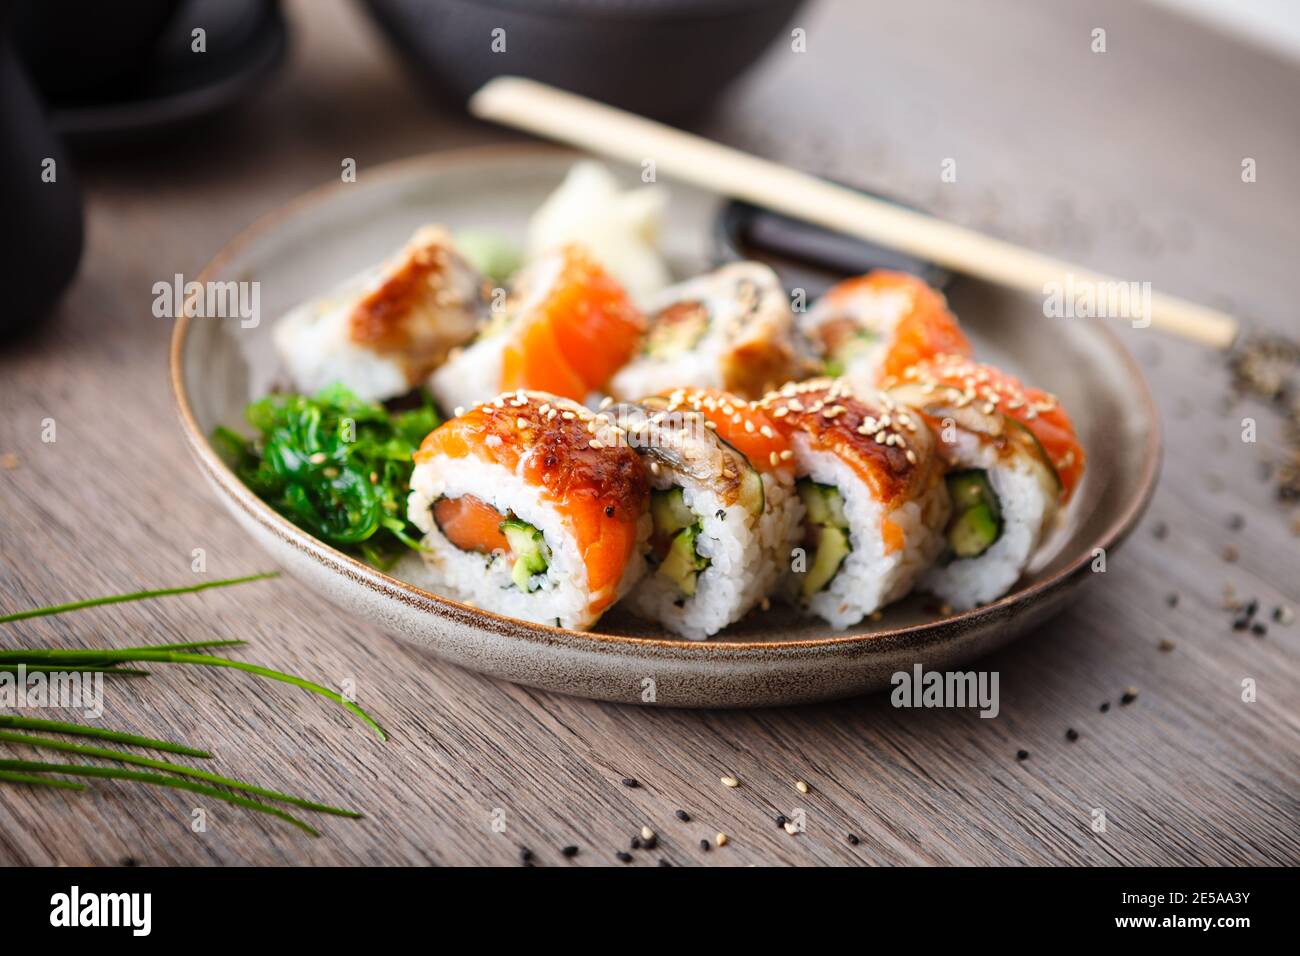 Sushi maki rolls with salmon, eel, avocado, cucumber on a plate with chopsticks, soy sauce, wasabi and ginger. Japanese traditional fish food closeup Stock Photo